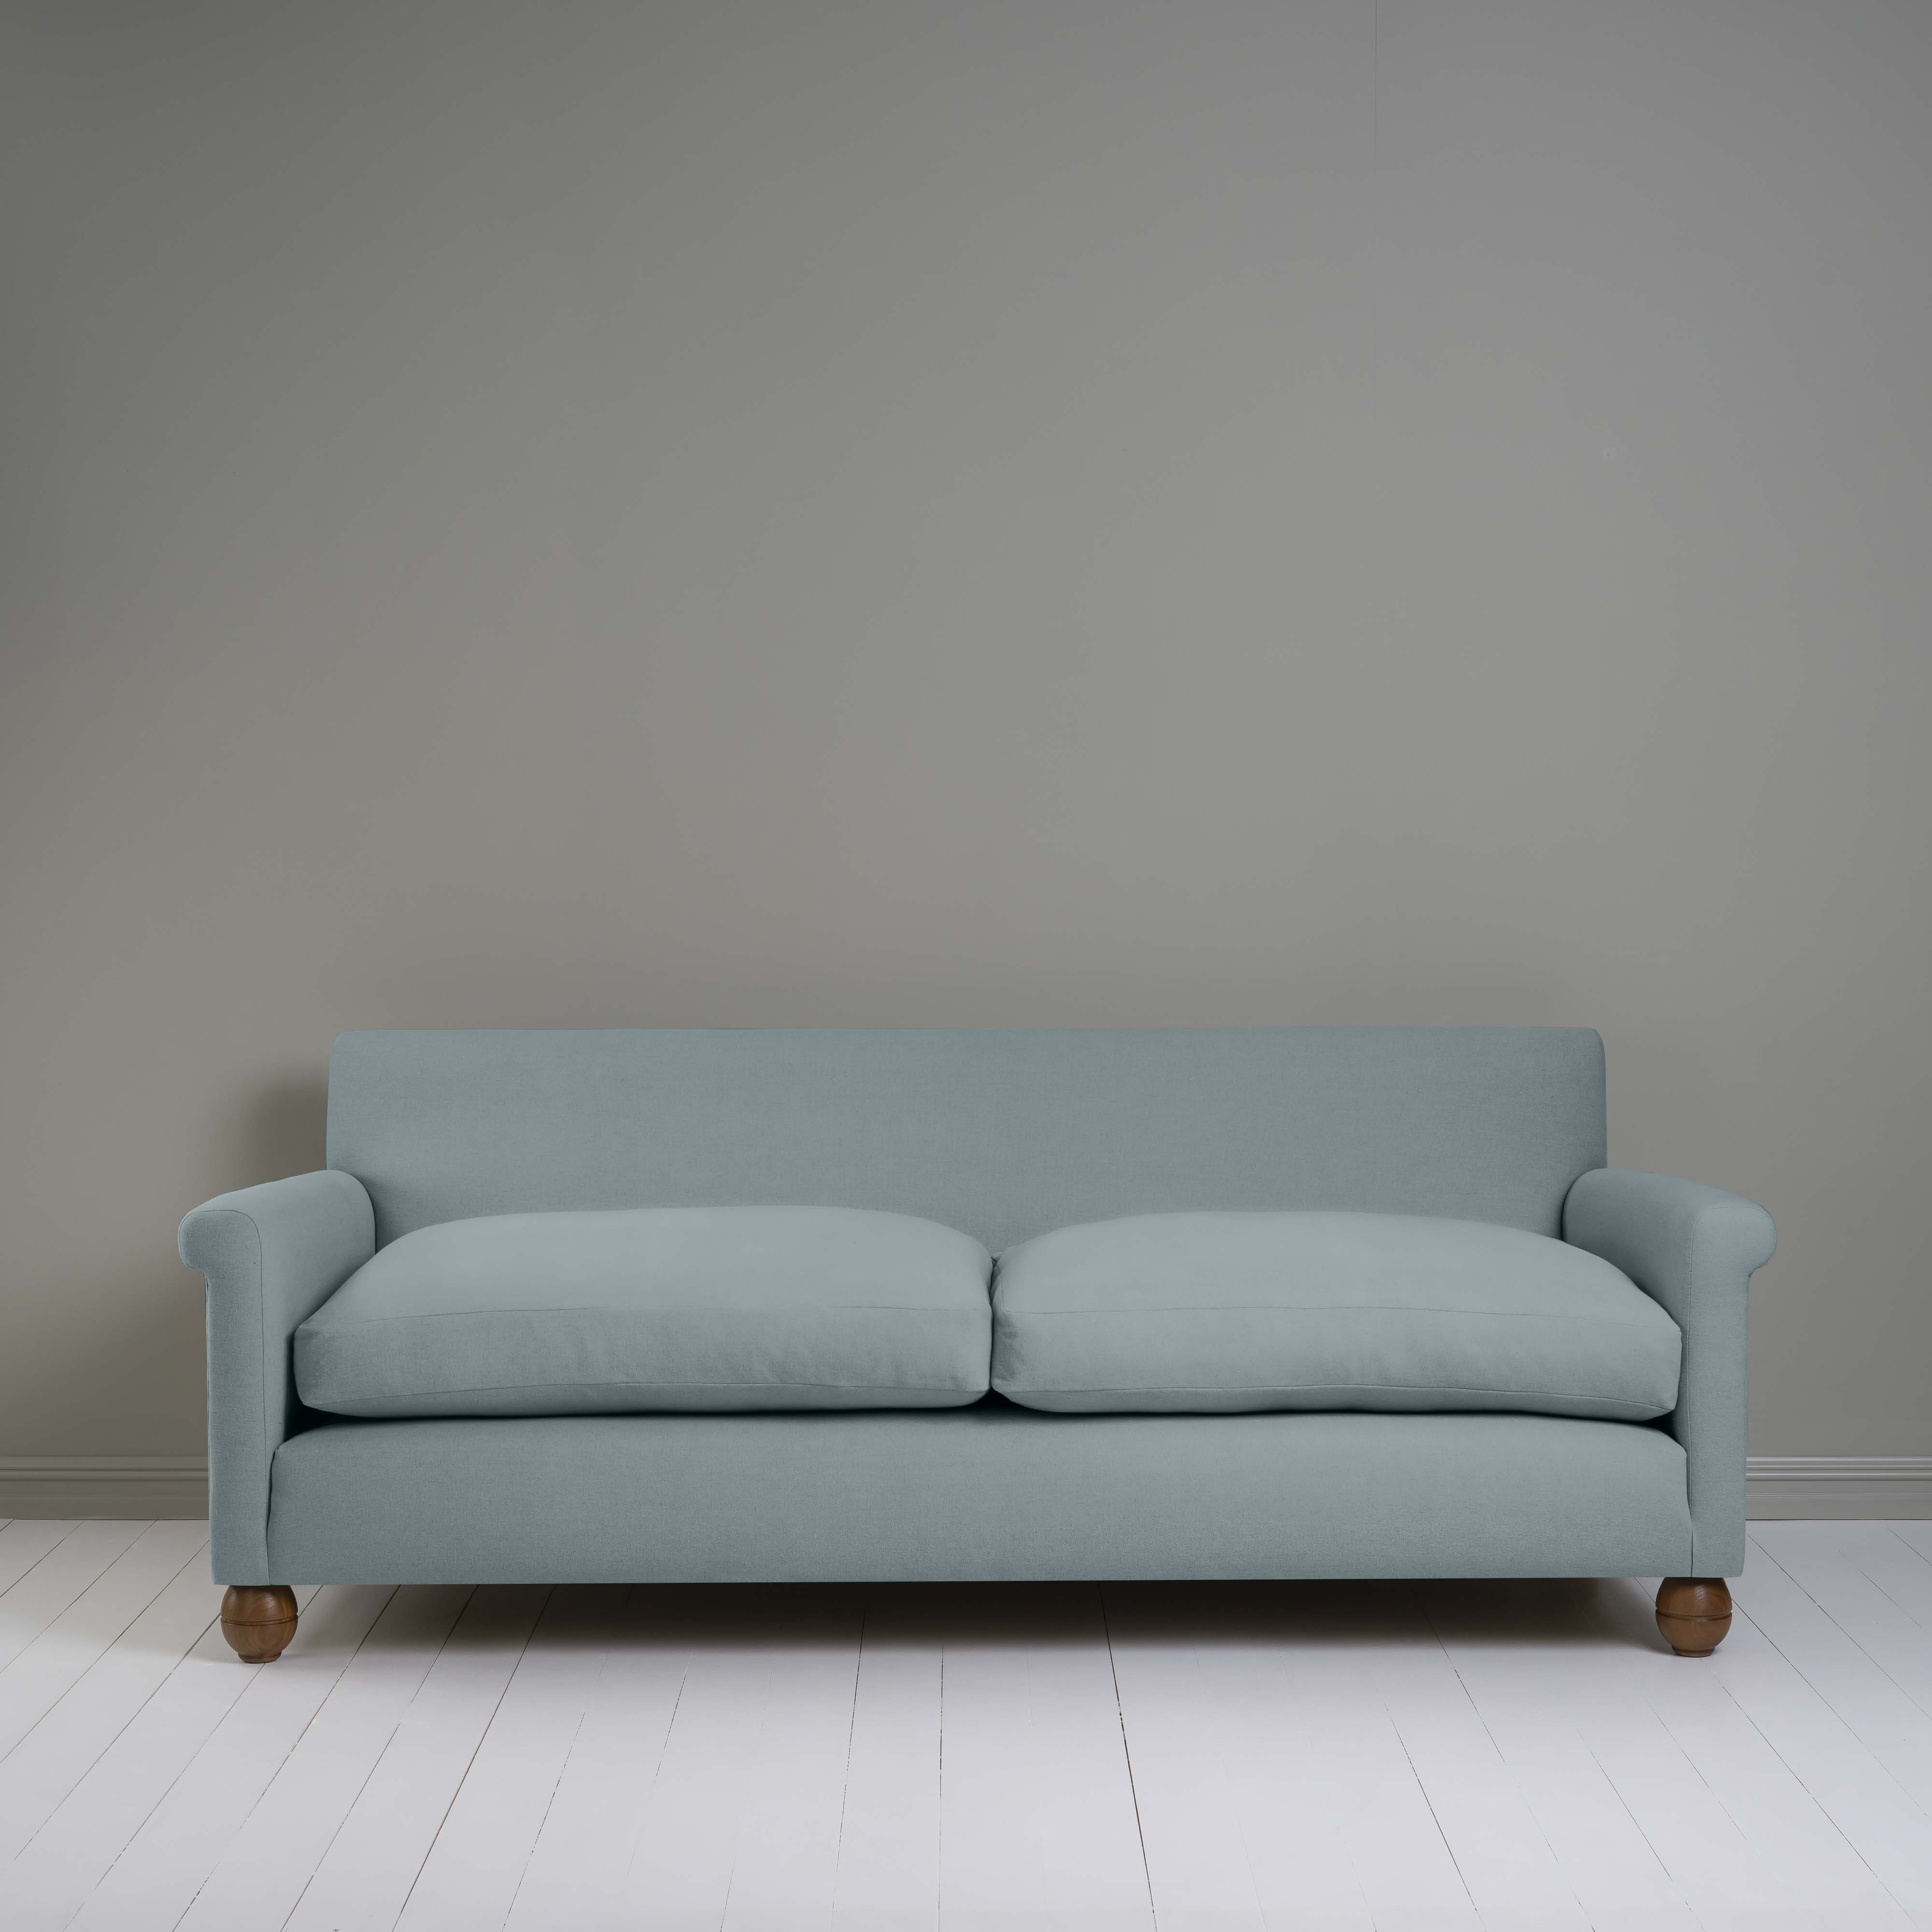  Idler 4 seater sofa in Laidback Linen Cerulean 